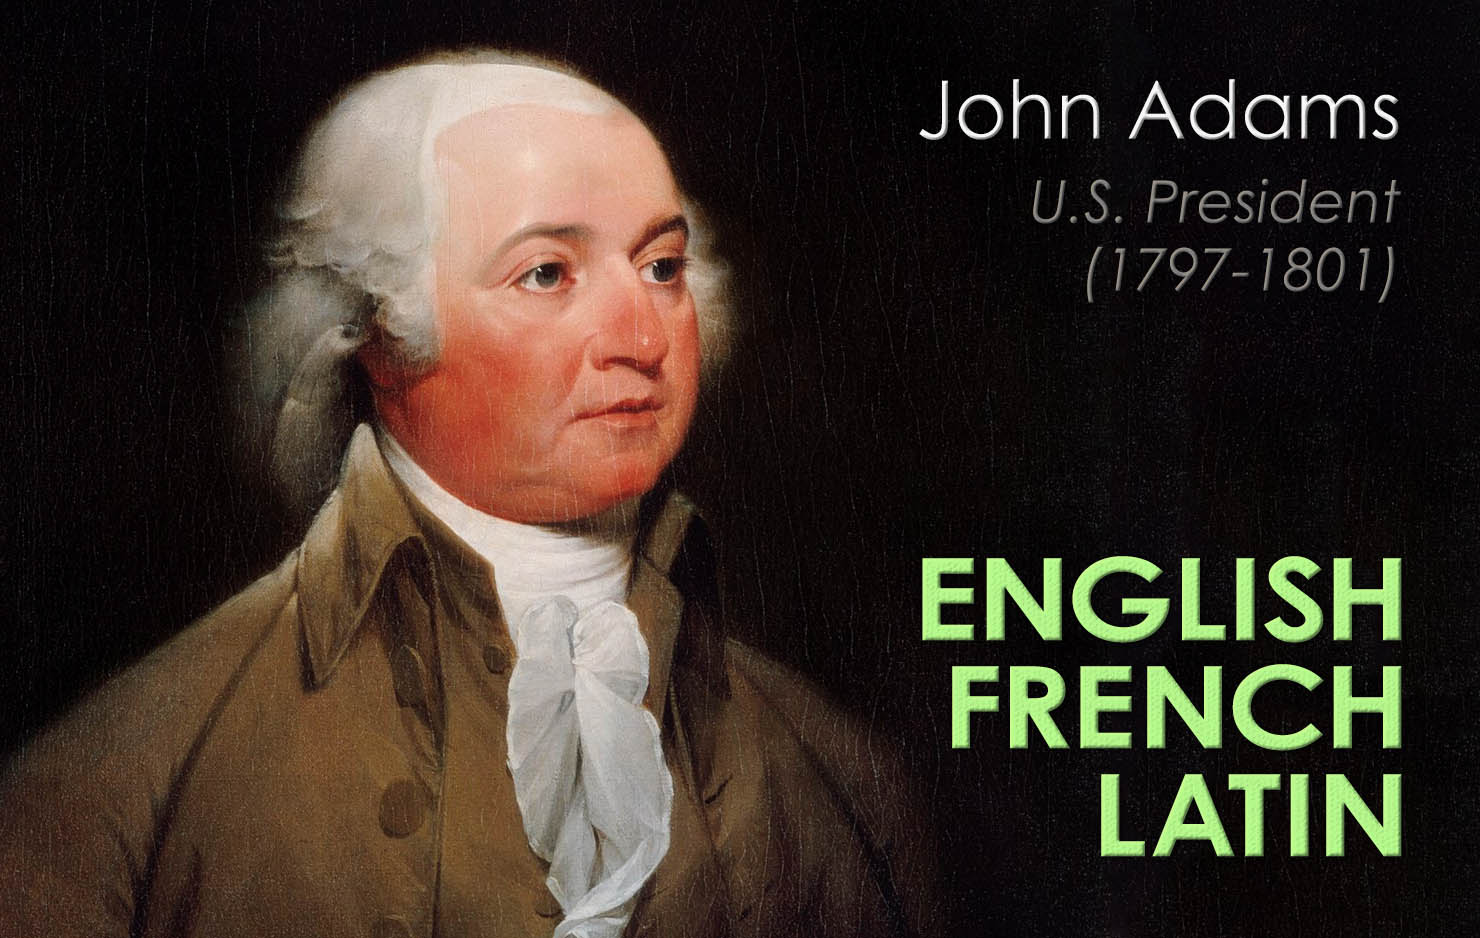 John Adams, the second president of the United States, learned to read Latin at a young age. Later in his life, he became fluent in French.
